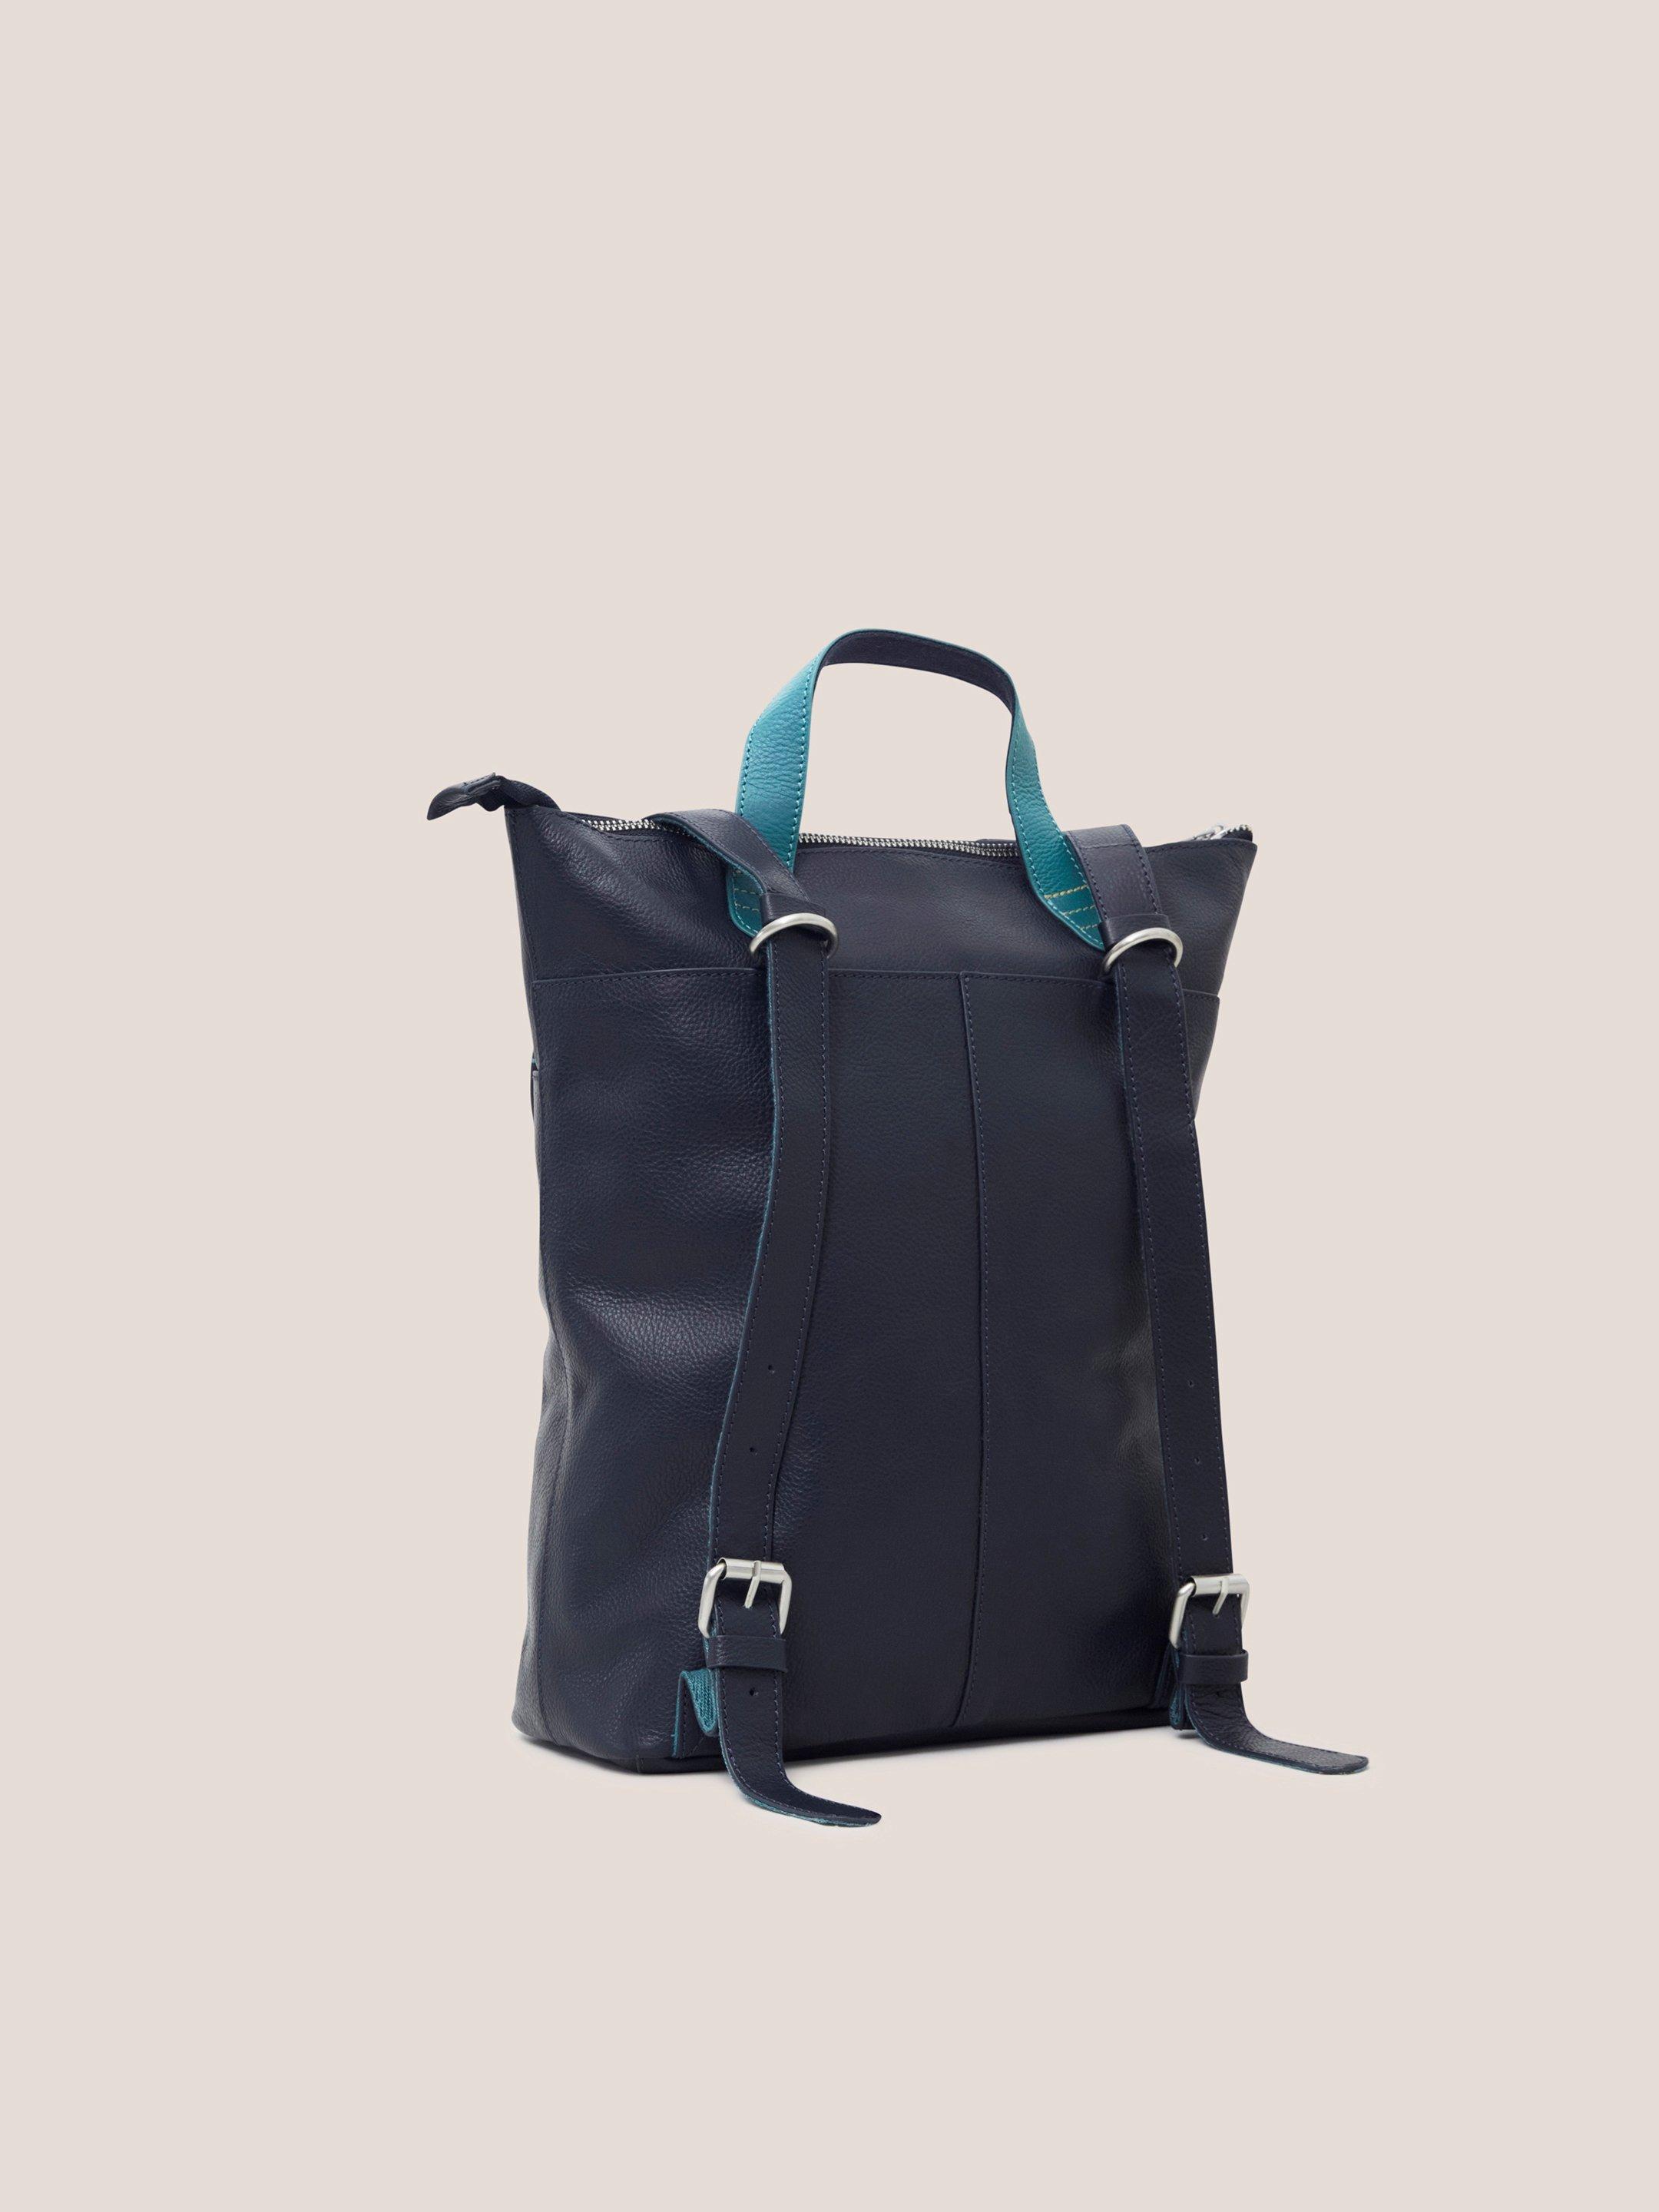 Flossy Convertible Leather Bag in NAVY MULTI - FLAT BACK